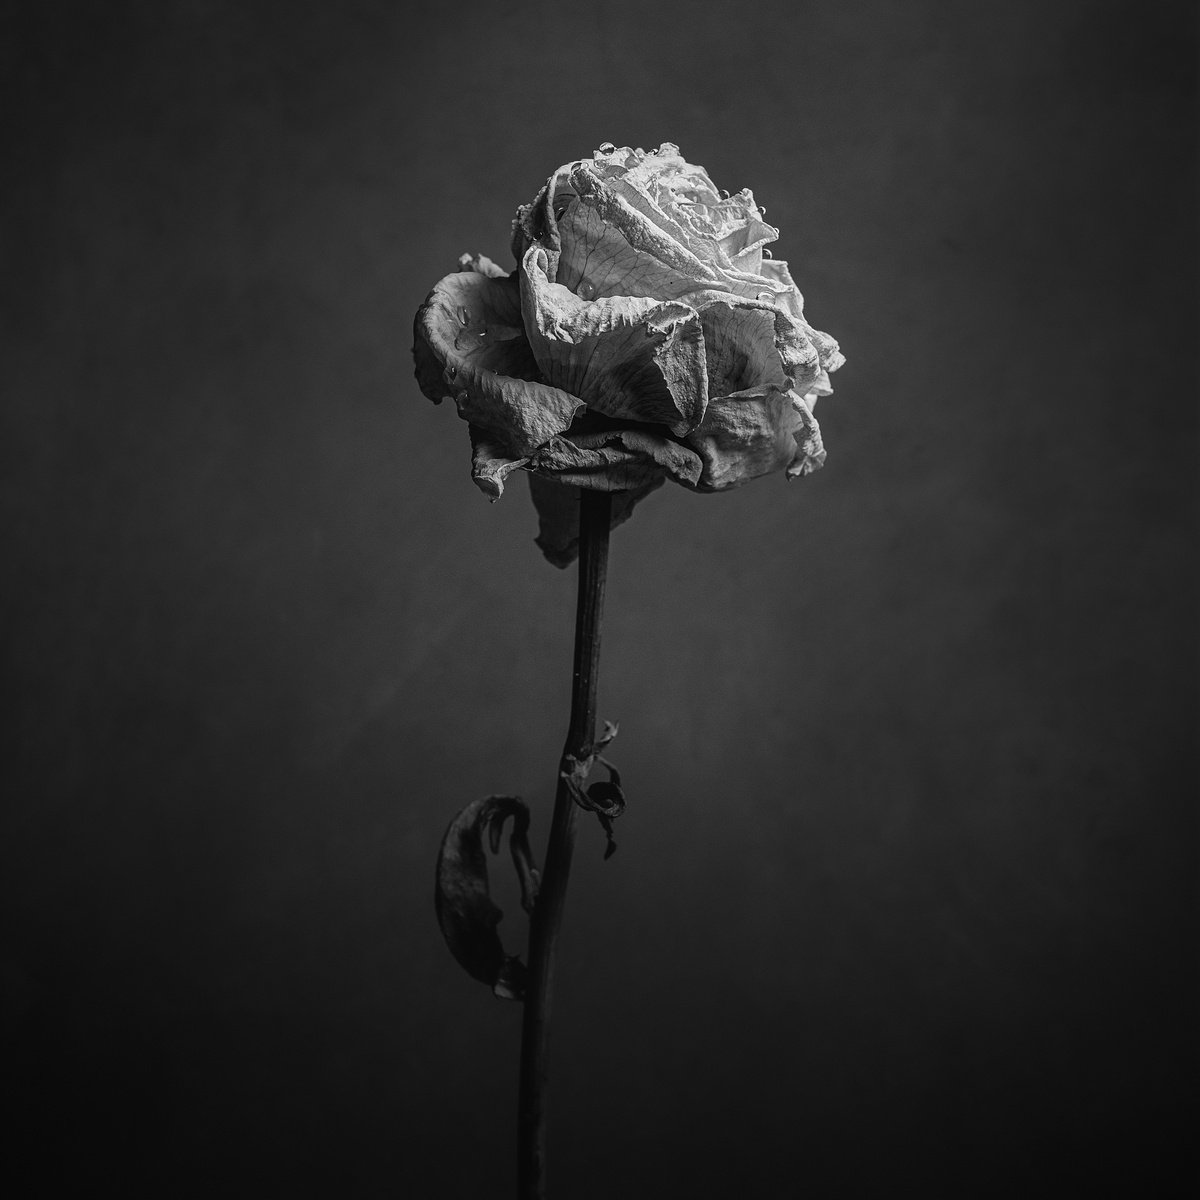 a rose out of time by Marcus Scott